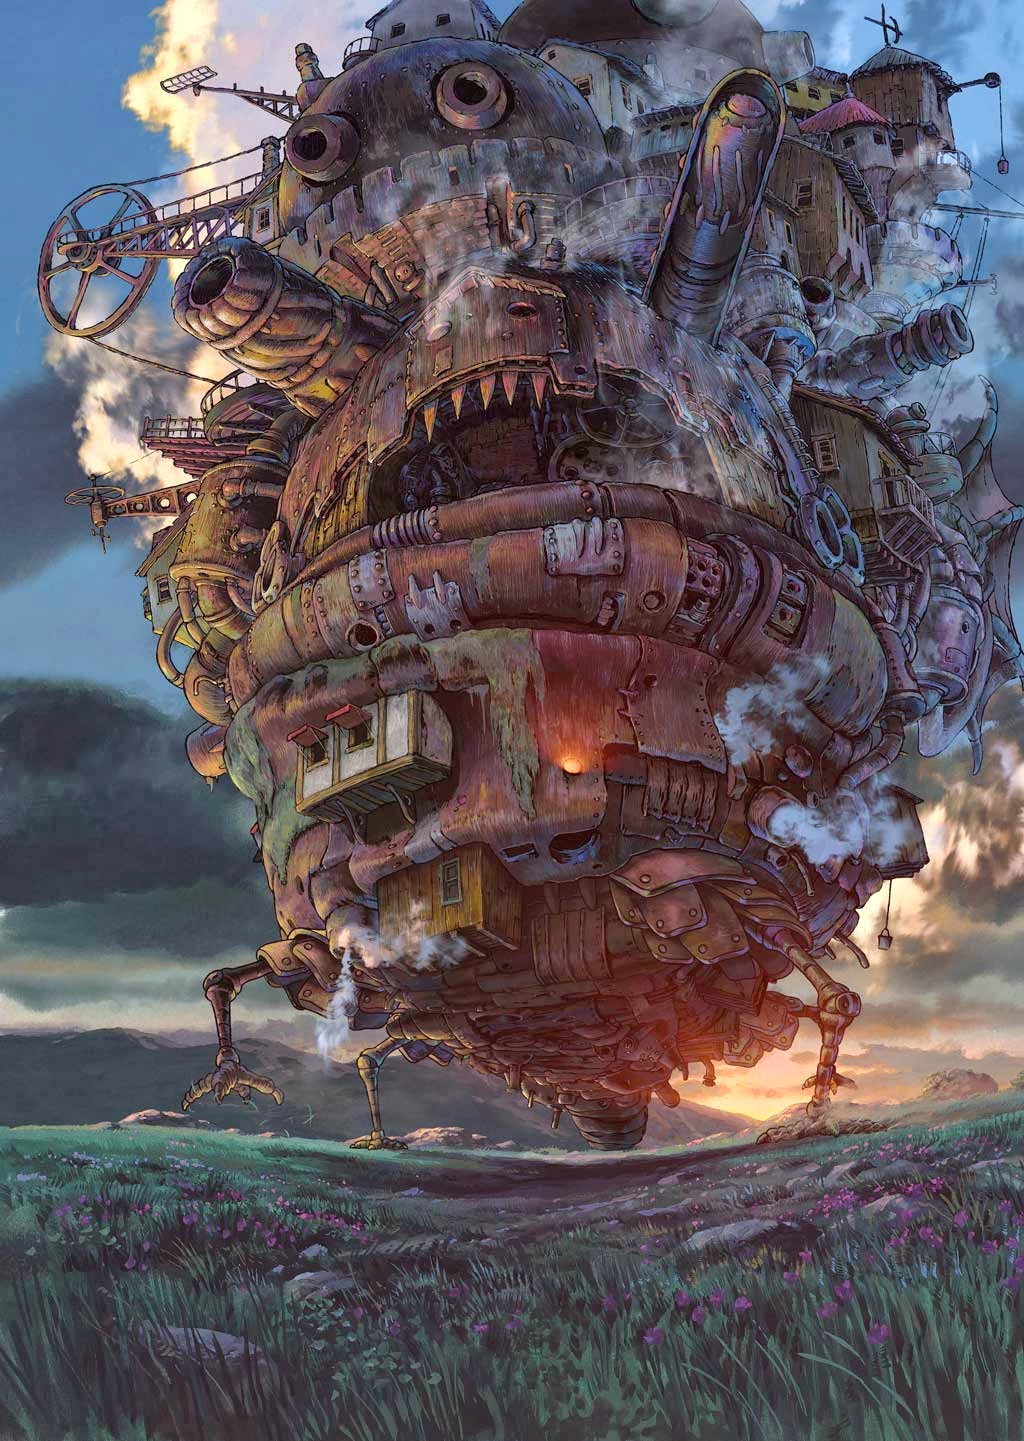 howls moving castle book